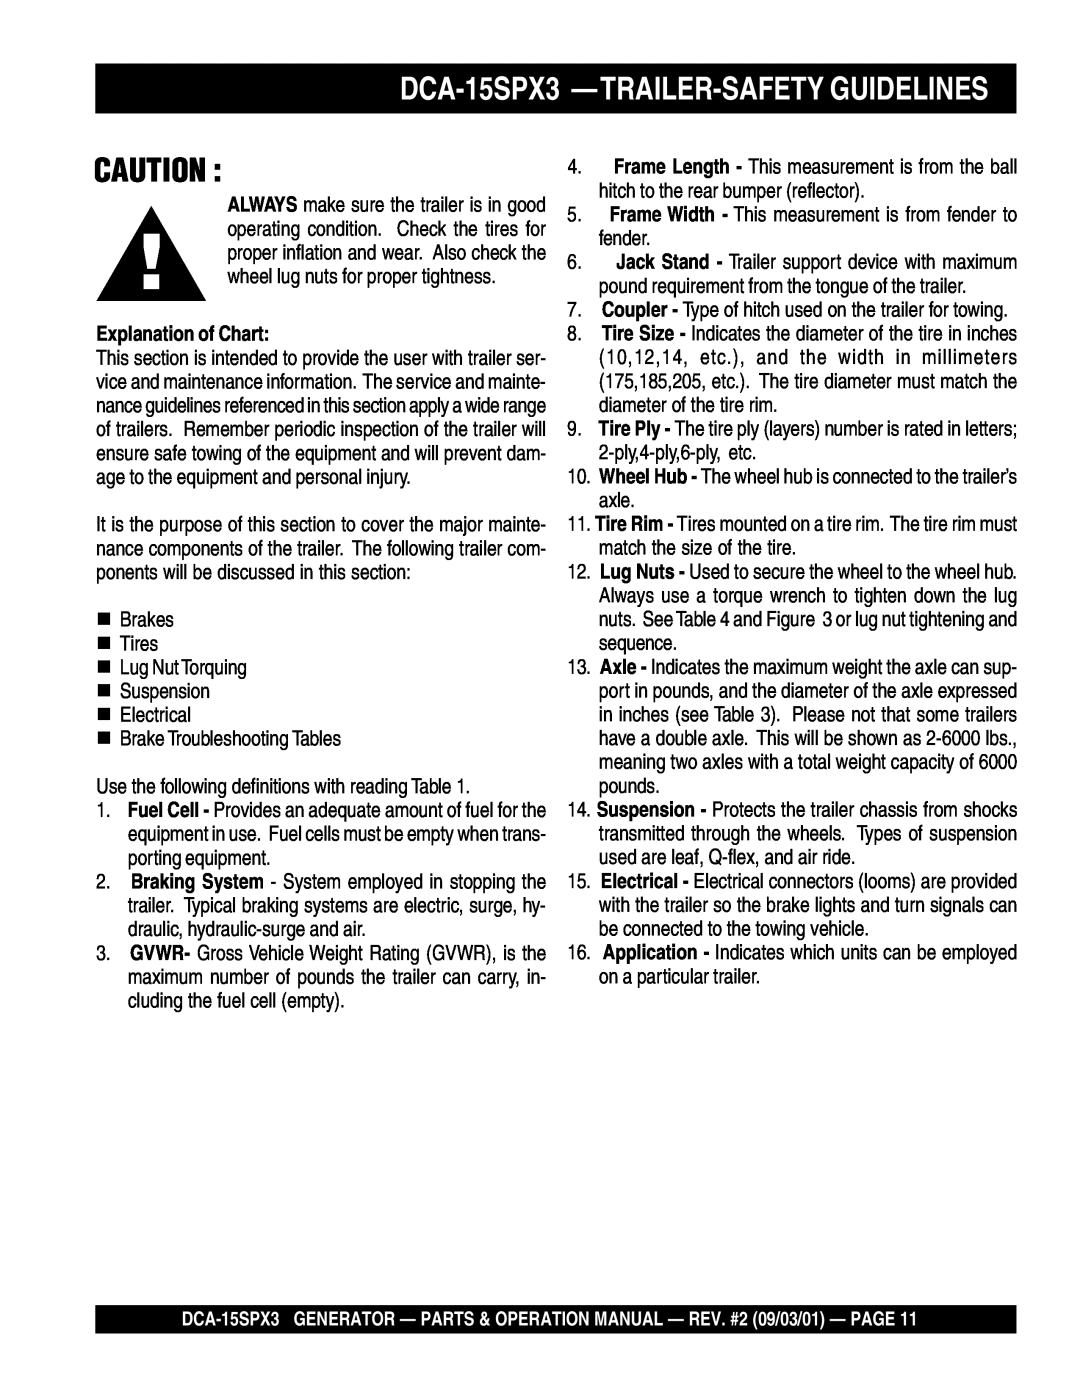 Multiquip operation manual DCA-15SPX3 —TRAILER-SAFETYGUIDELINES, Explanation of Chart 